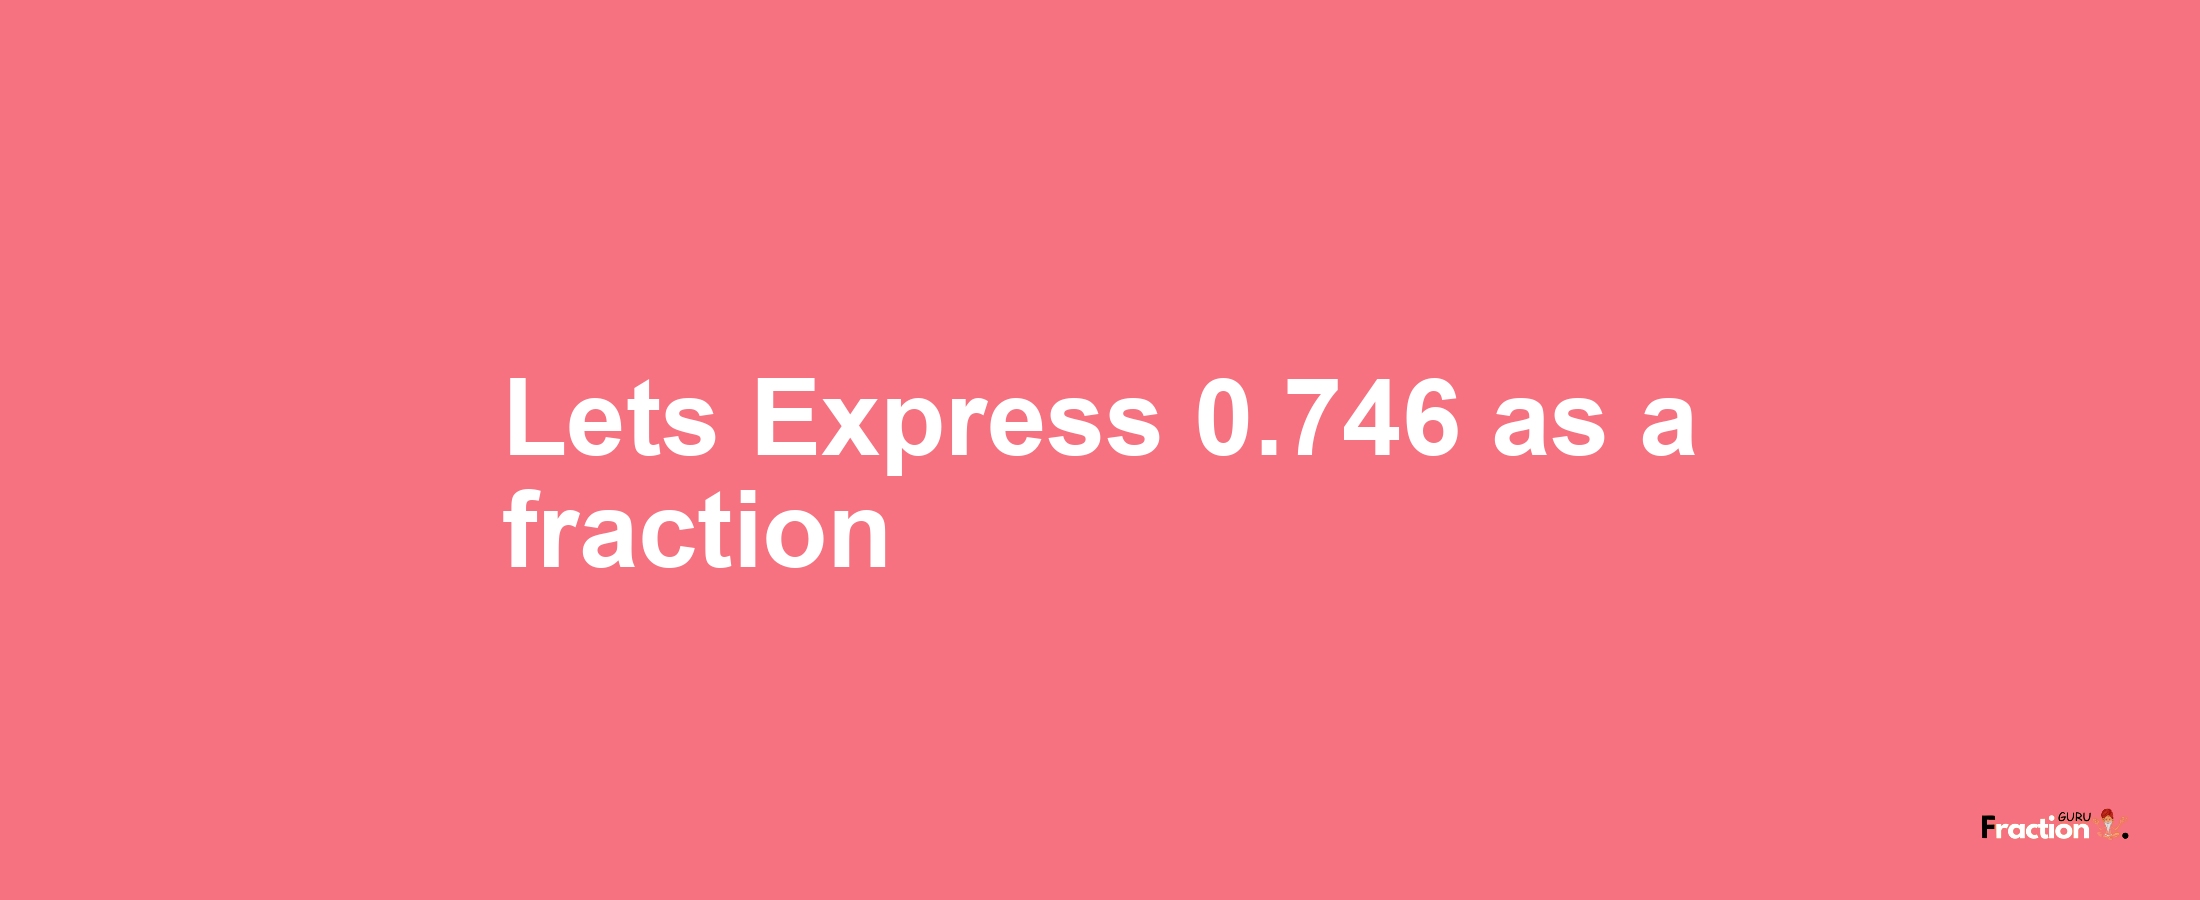 Lets Express 0.746 as afraction